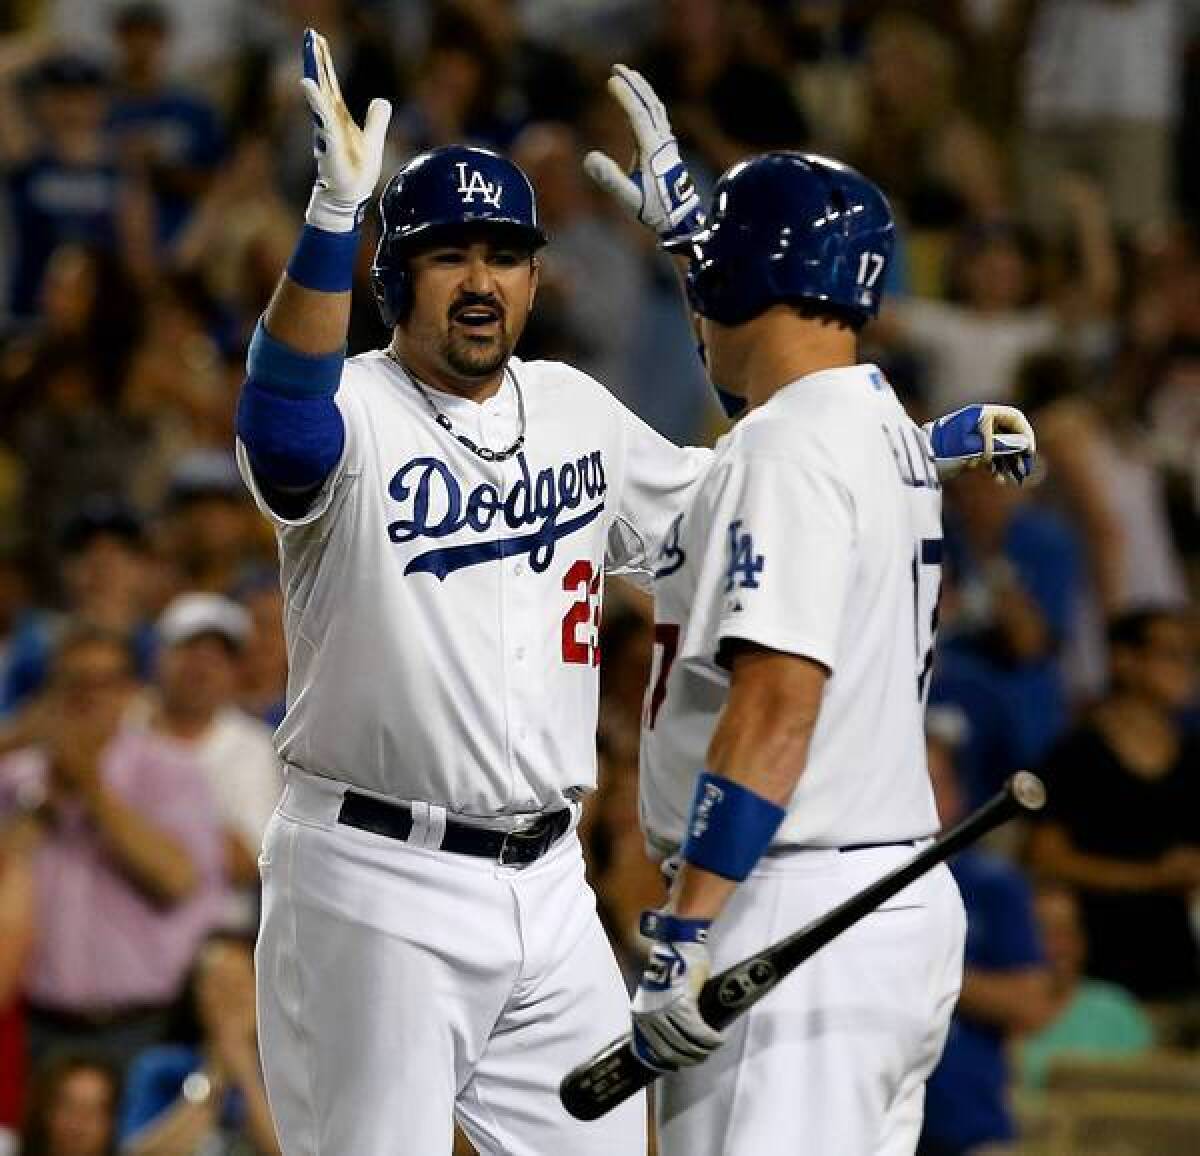 Dodgers teammates Adrian Gonzalez and A.J. Ellis give each other a high five. The team's new owners have been spending big on talent and are seeing results. [For the Record, 12:06 p.m. PDT Oct. 6: An earlier version of this caption misidentified A.J. Ellis as Mark Ellis.]